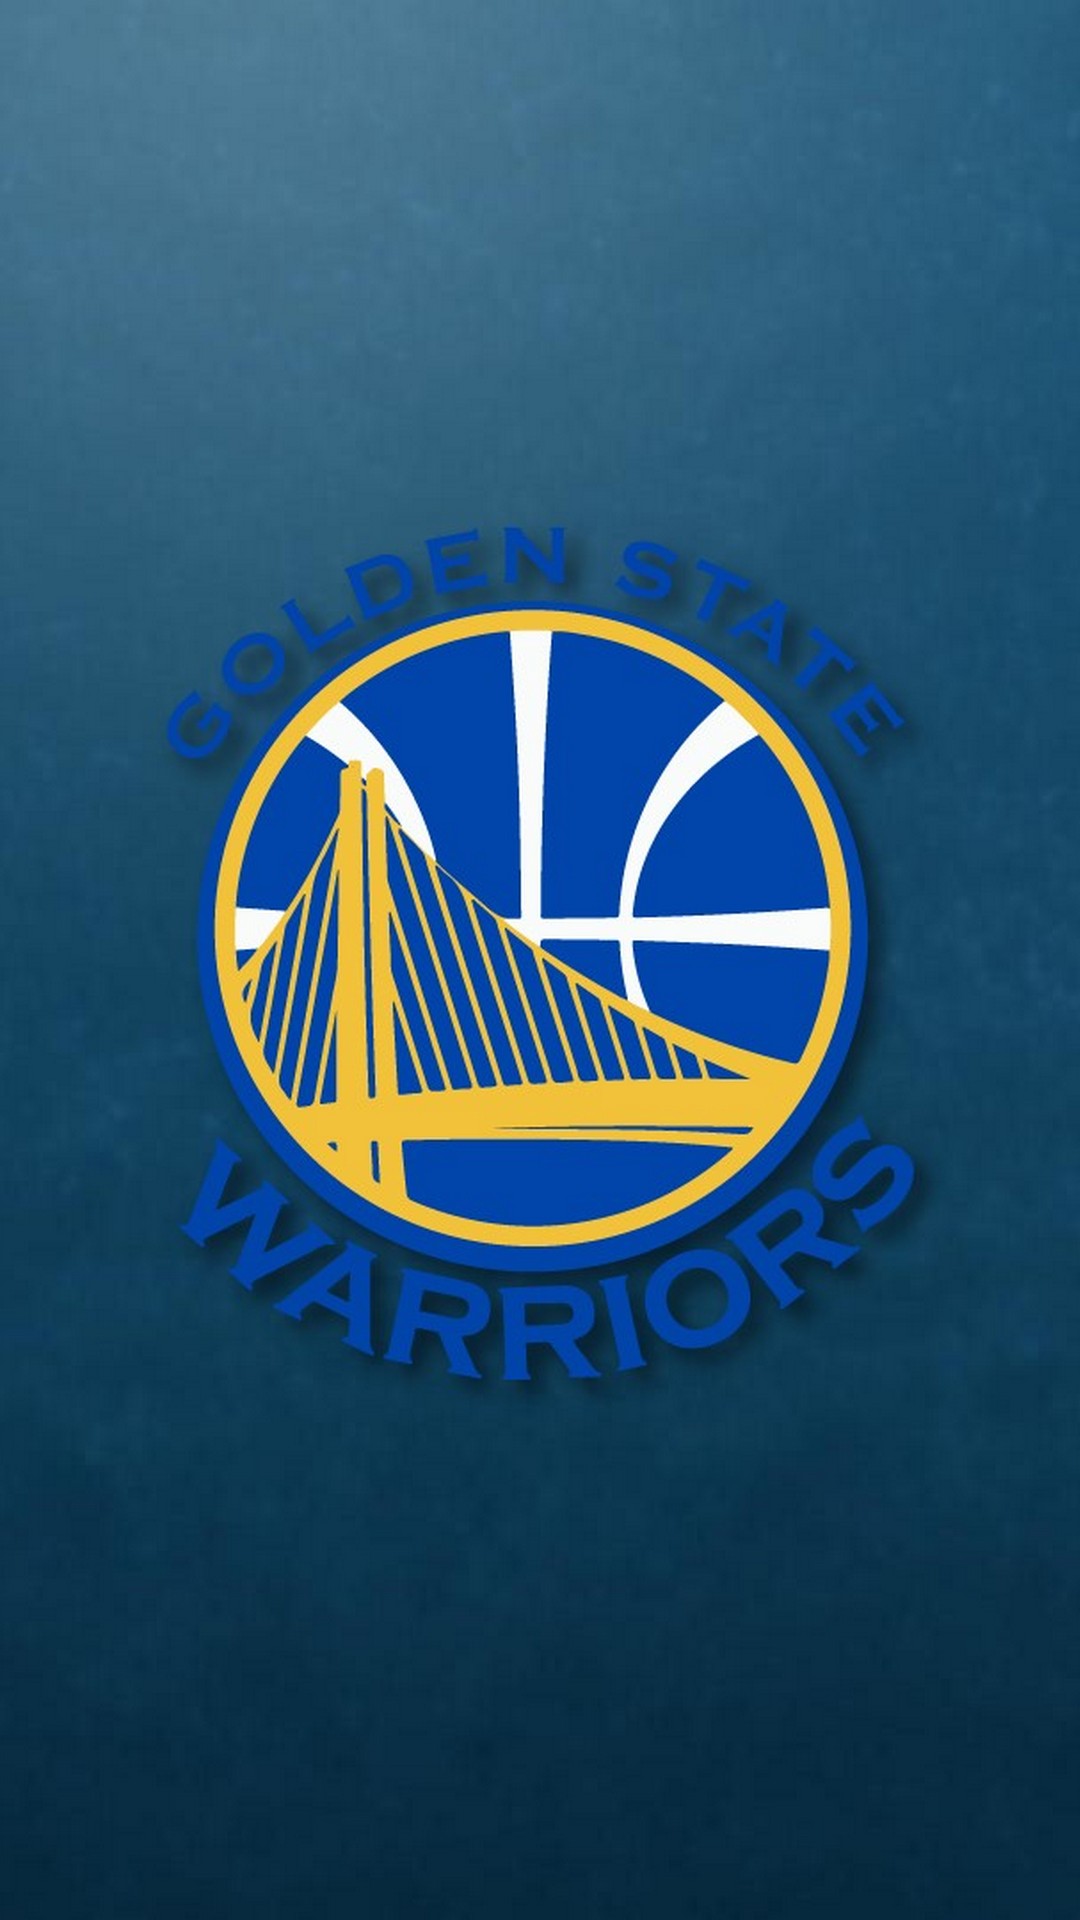 Golden State Warriors Phone Backgrounds with image resolution 1080x1920 pixel. You can make this wallpaper for your Desktop Computer Backgrounds, Mac Wallpapers, Android Lock screen or iPhone Screensavers